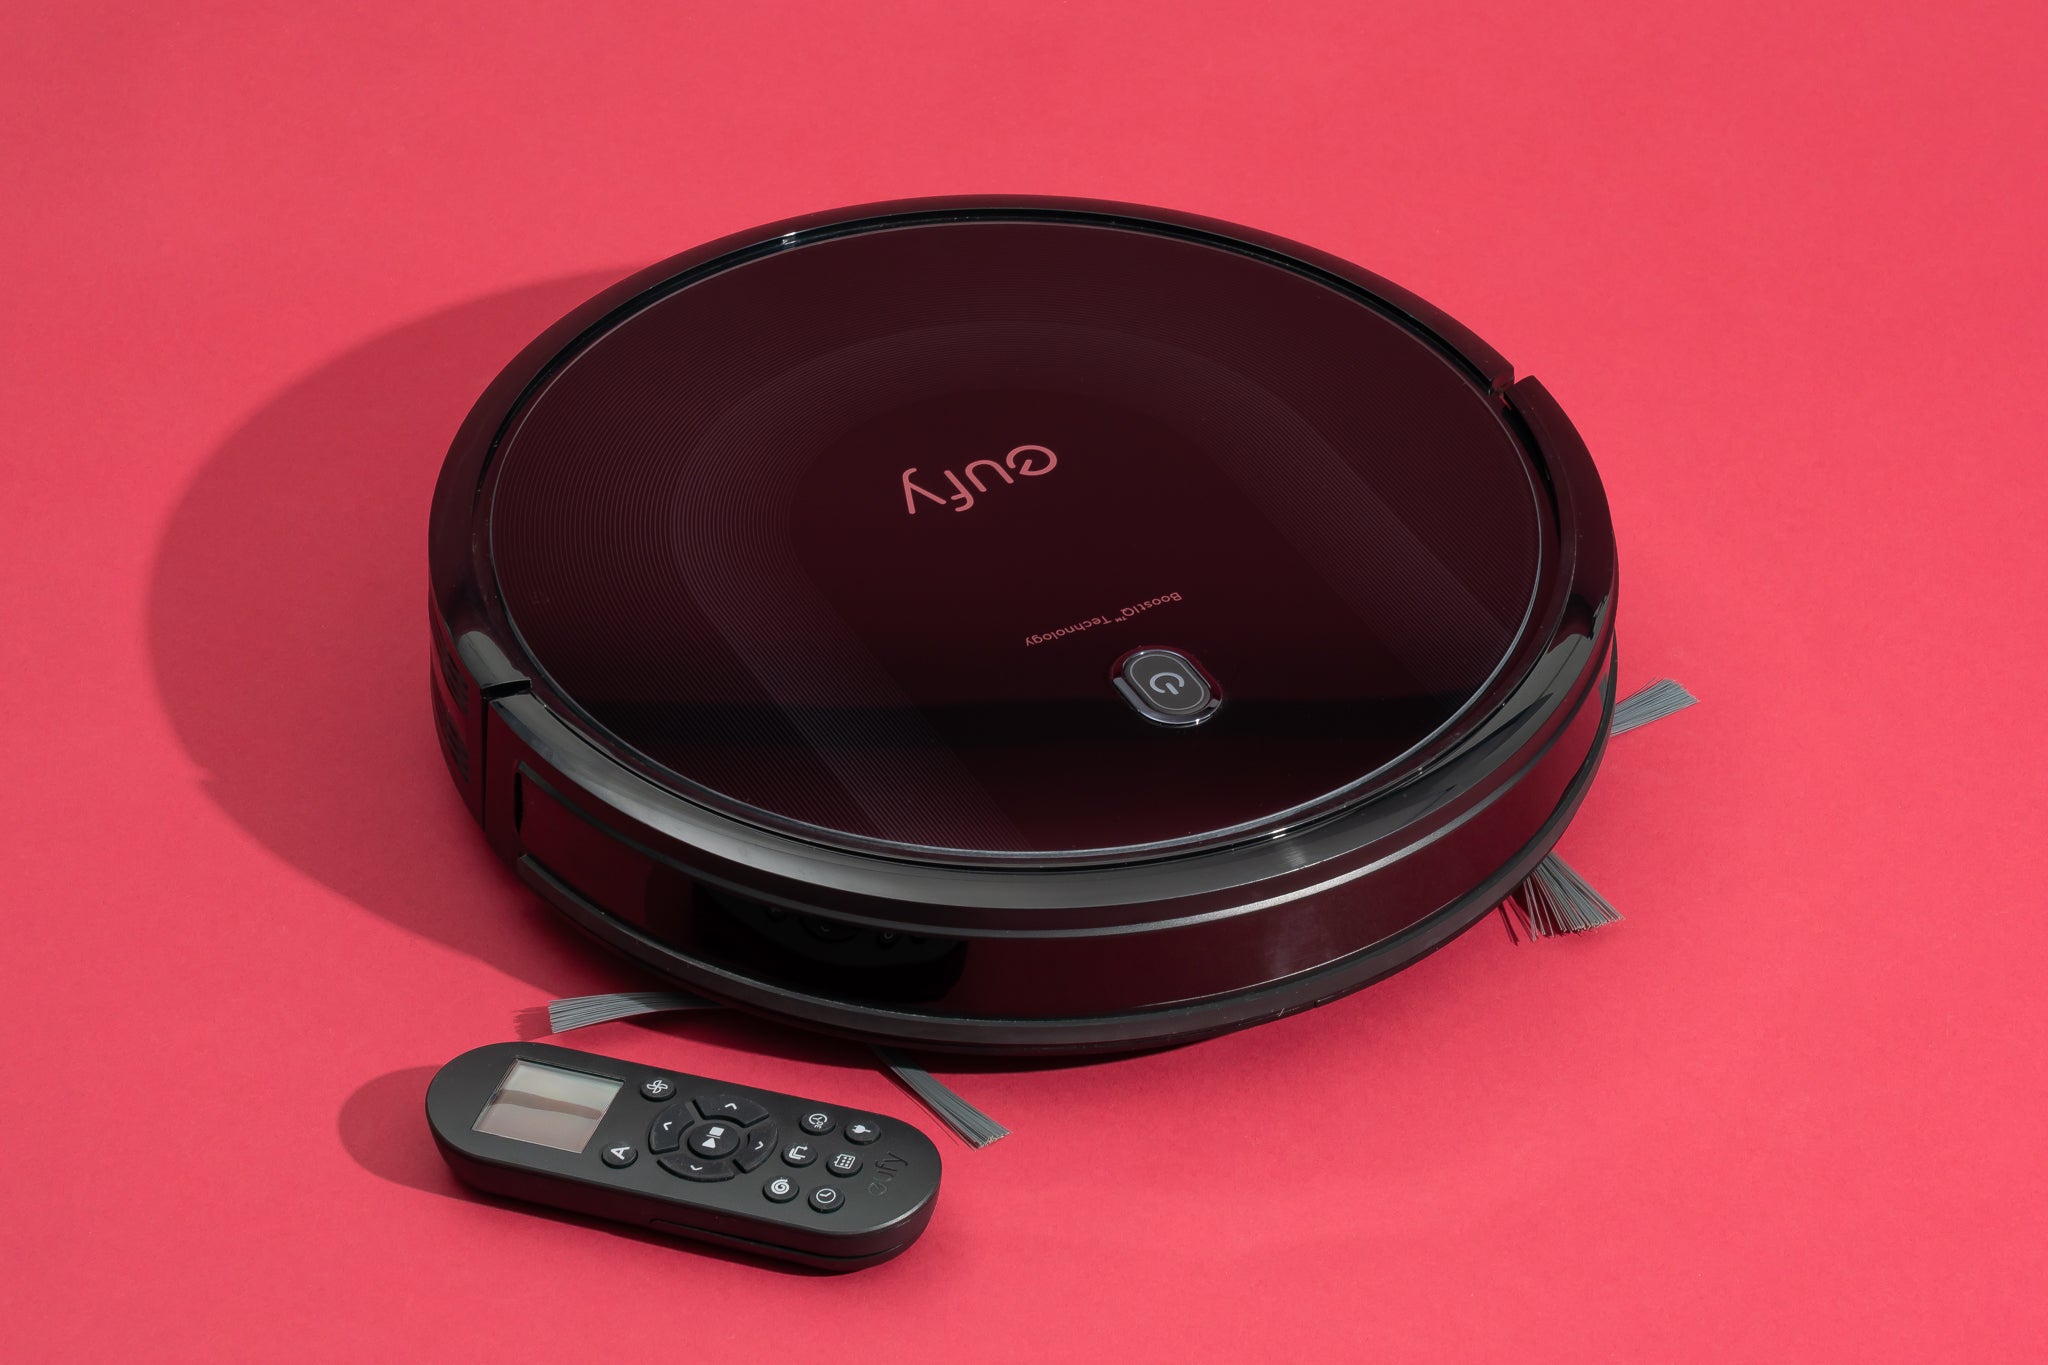 Get Your Open Box Eufy RoboVac G30 Robot Vacuum For Under $100